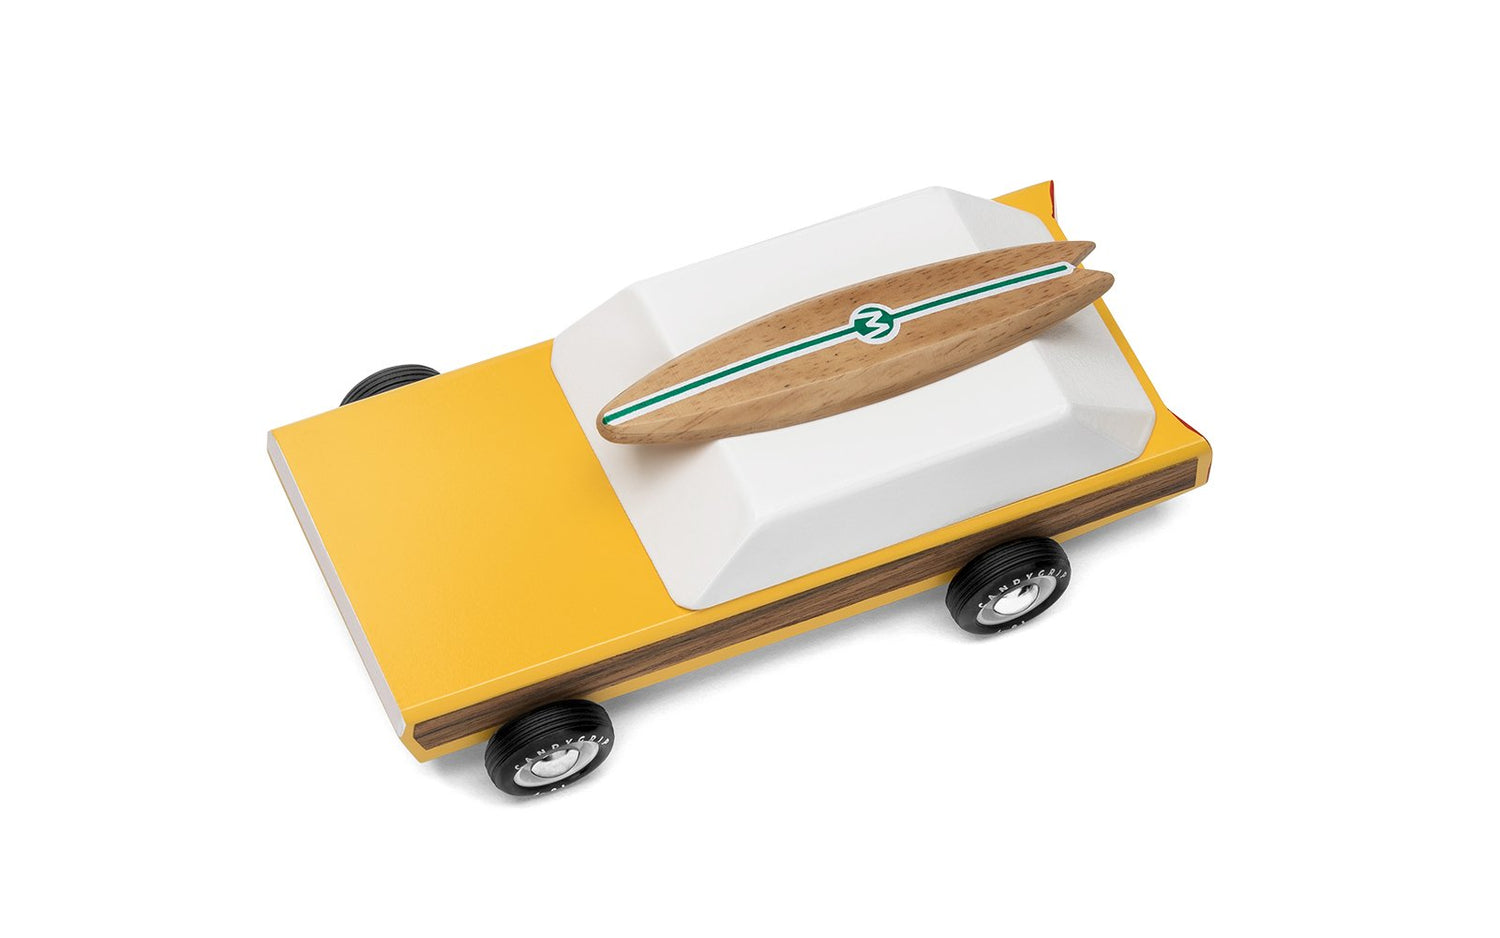 Woodie classic toy car by Candylab Toys. Includes surfboard.